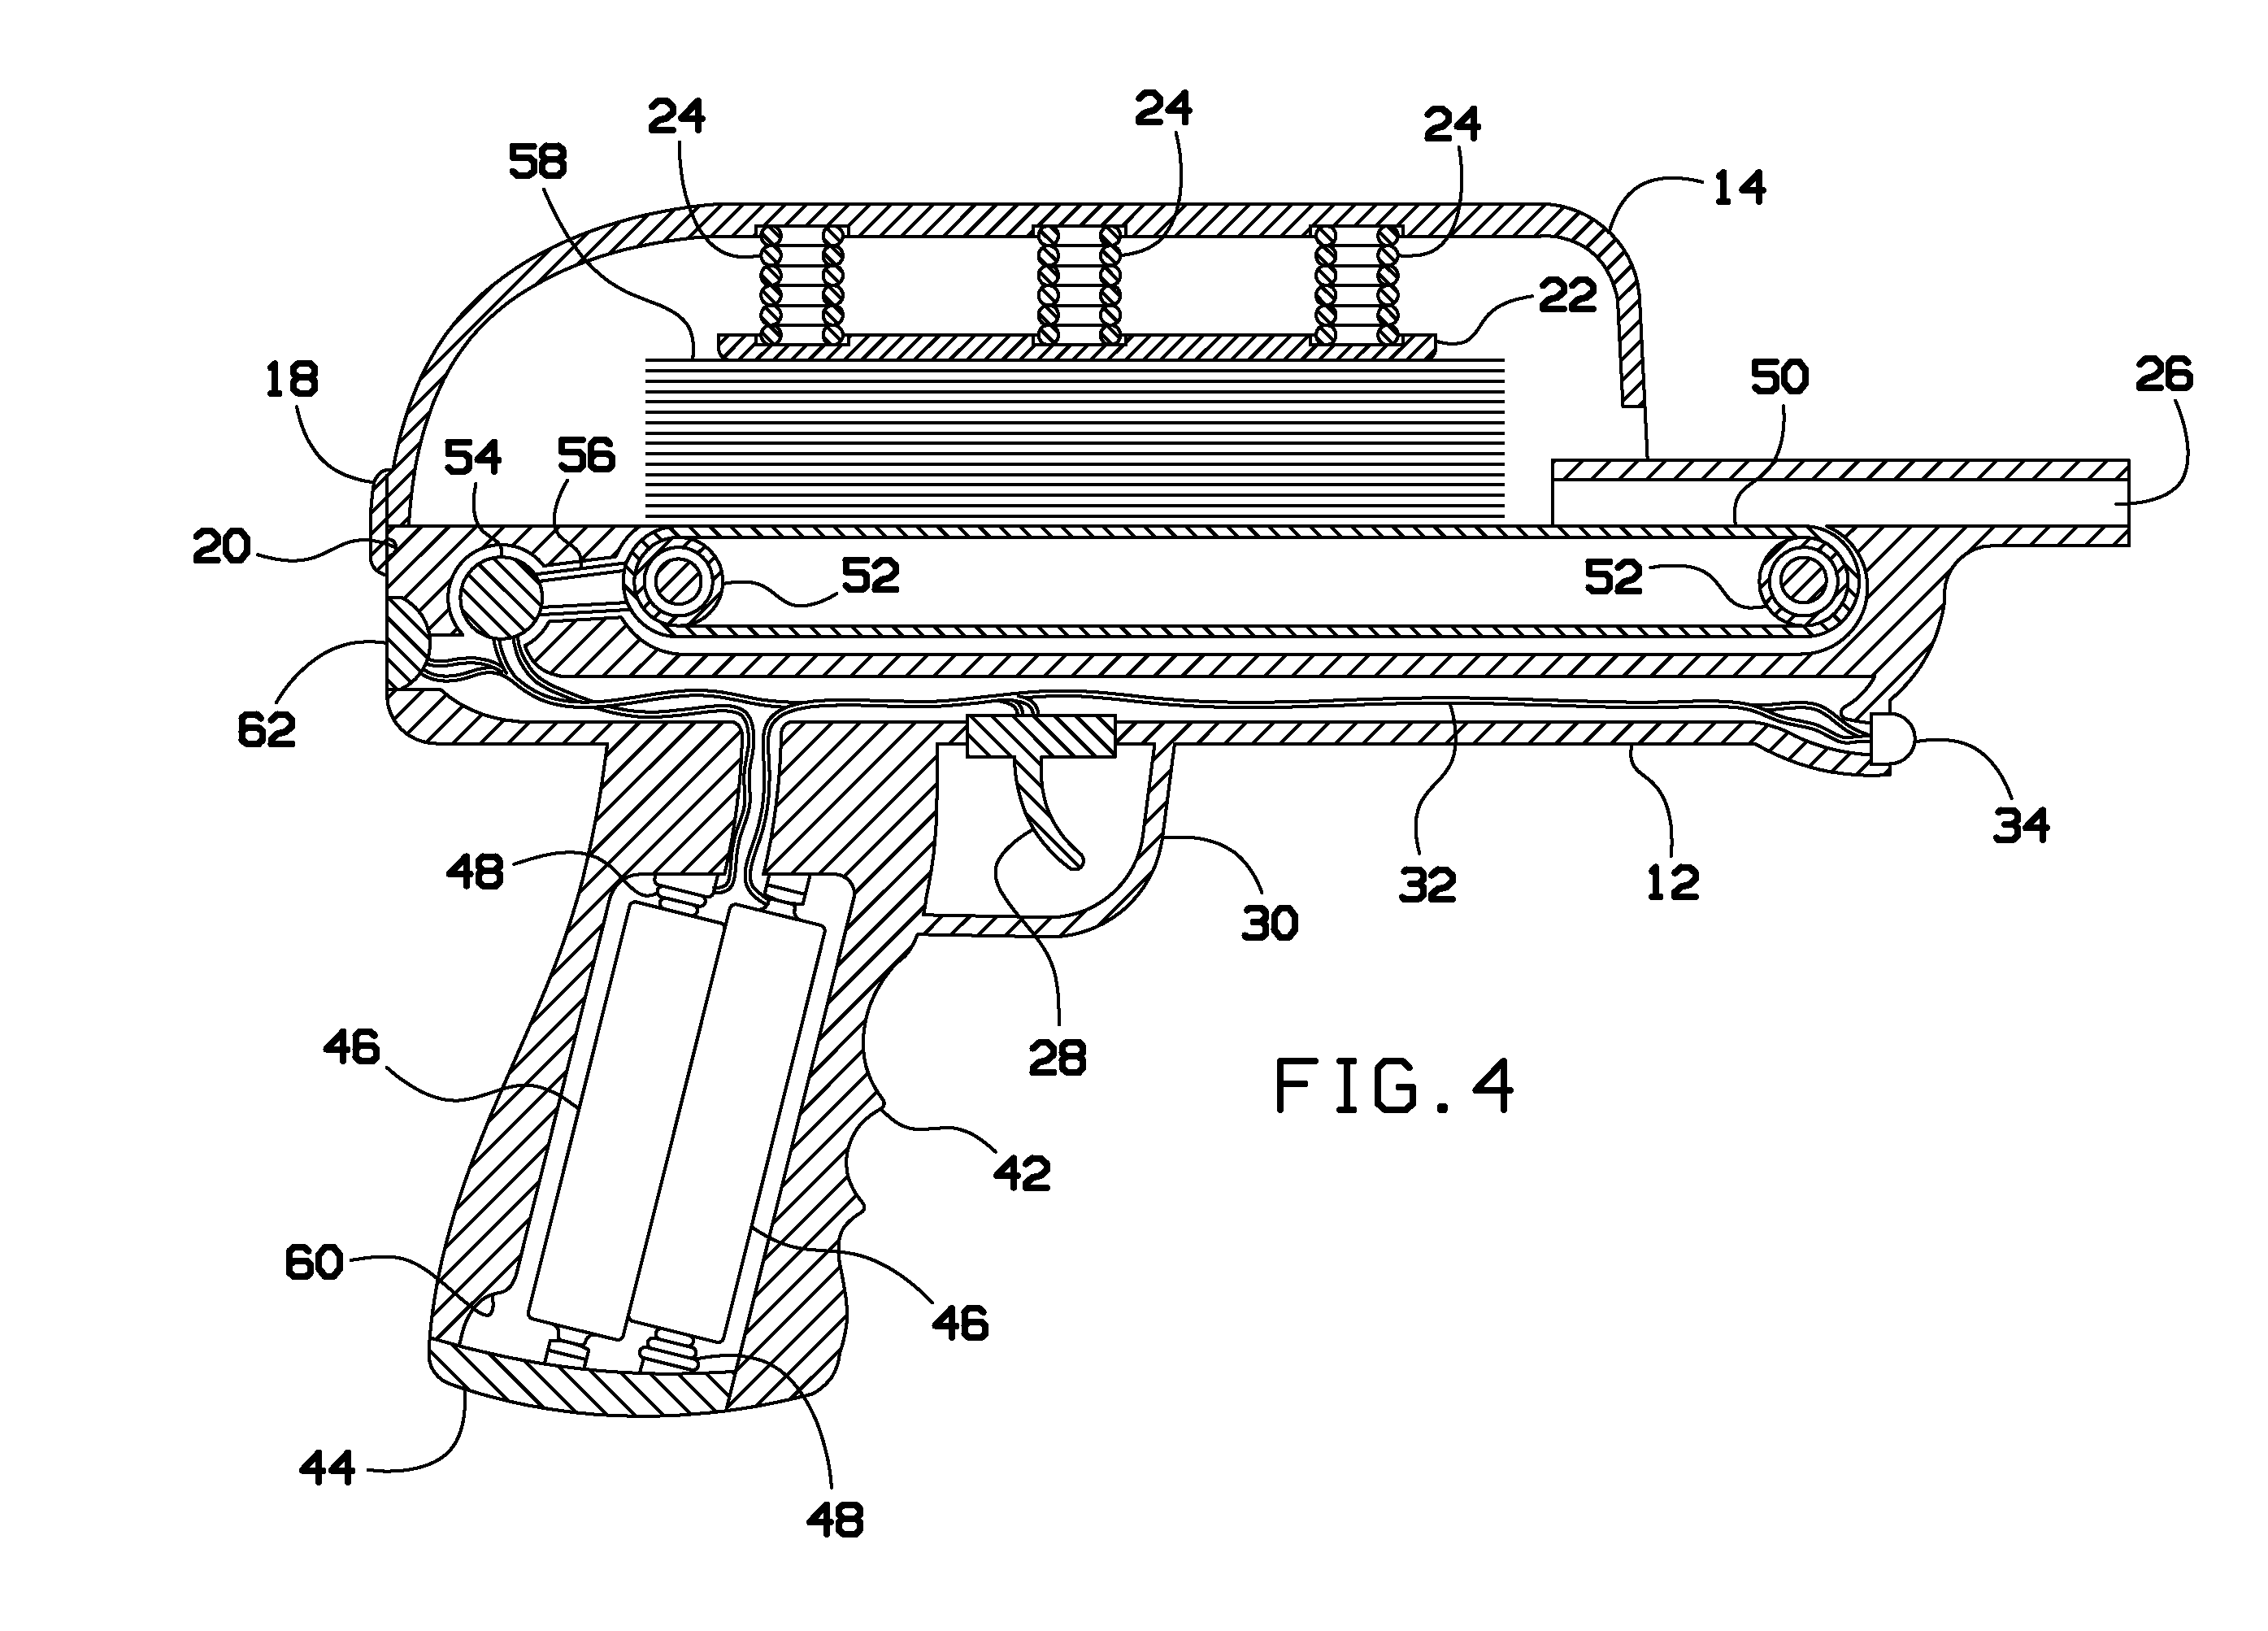 Device for shooting paper currency